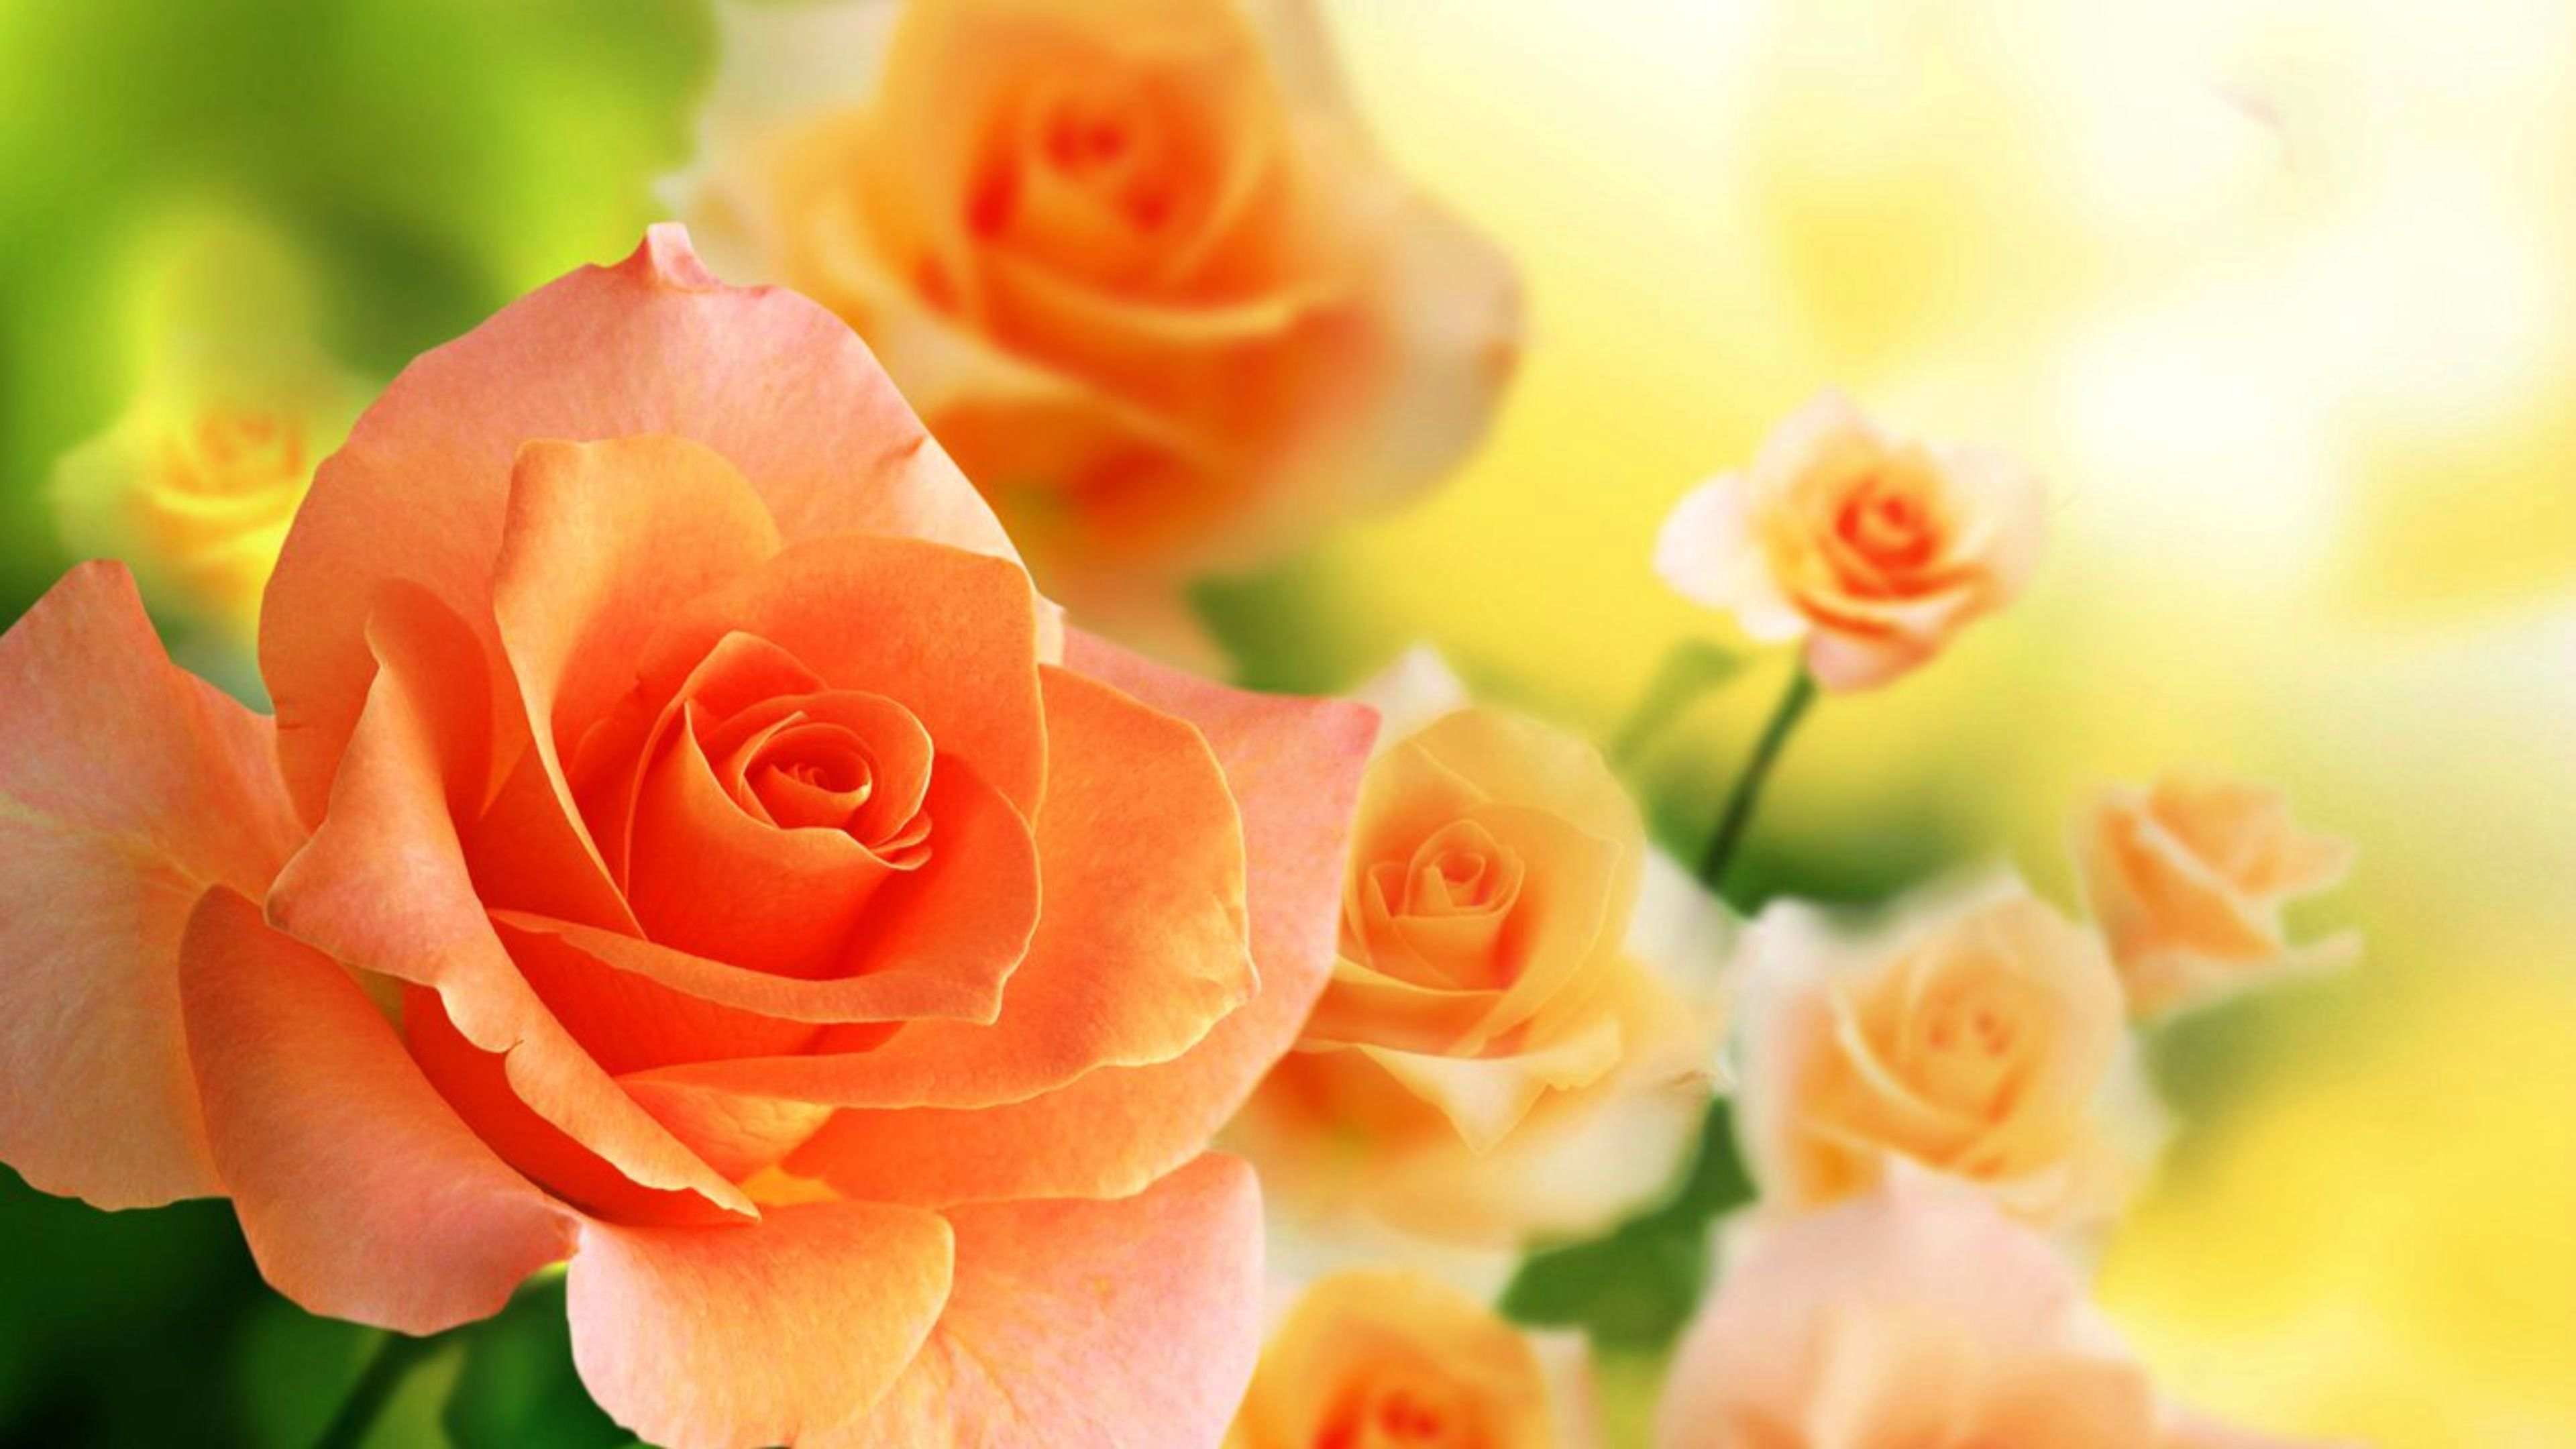 3840x2160 Wallpaper Most Beautiful Orange Rose In The World Hd Image With Flower Colourful High Qual Rose Flower Wallpaper Beautiful Flowers Wallpaper Flower Wallpaper